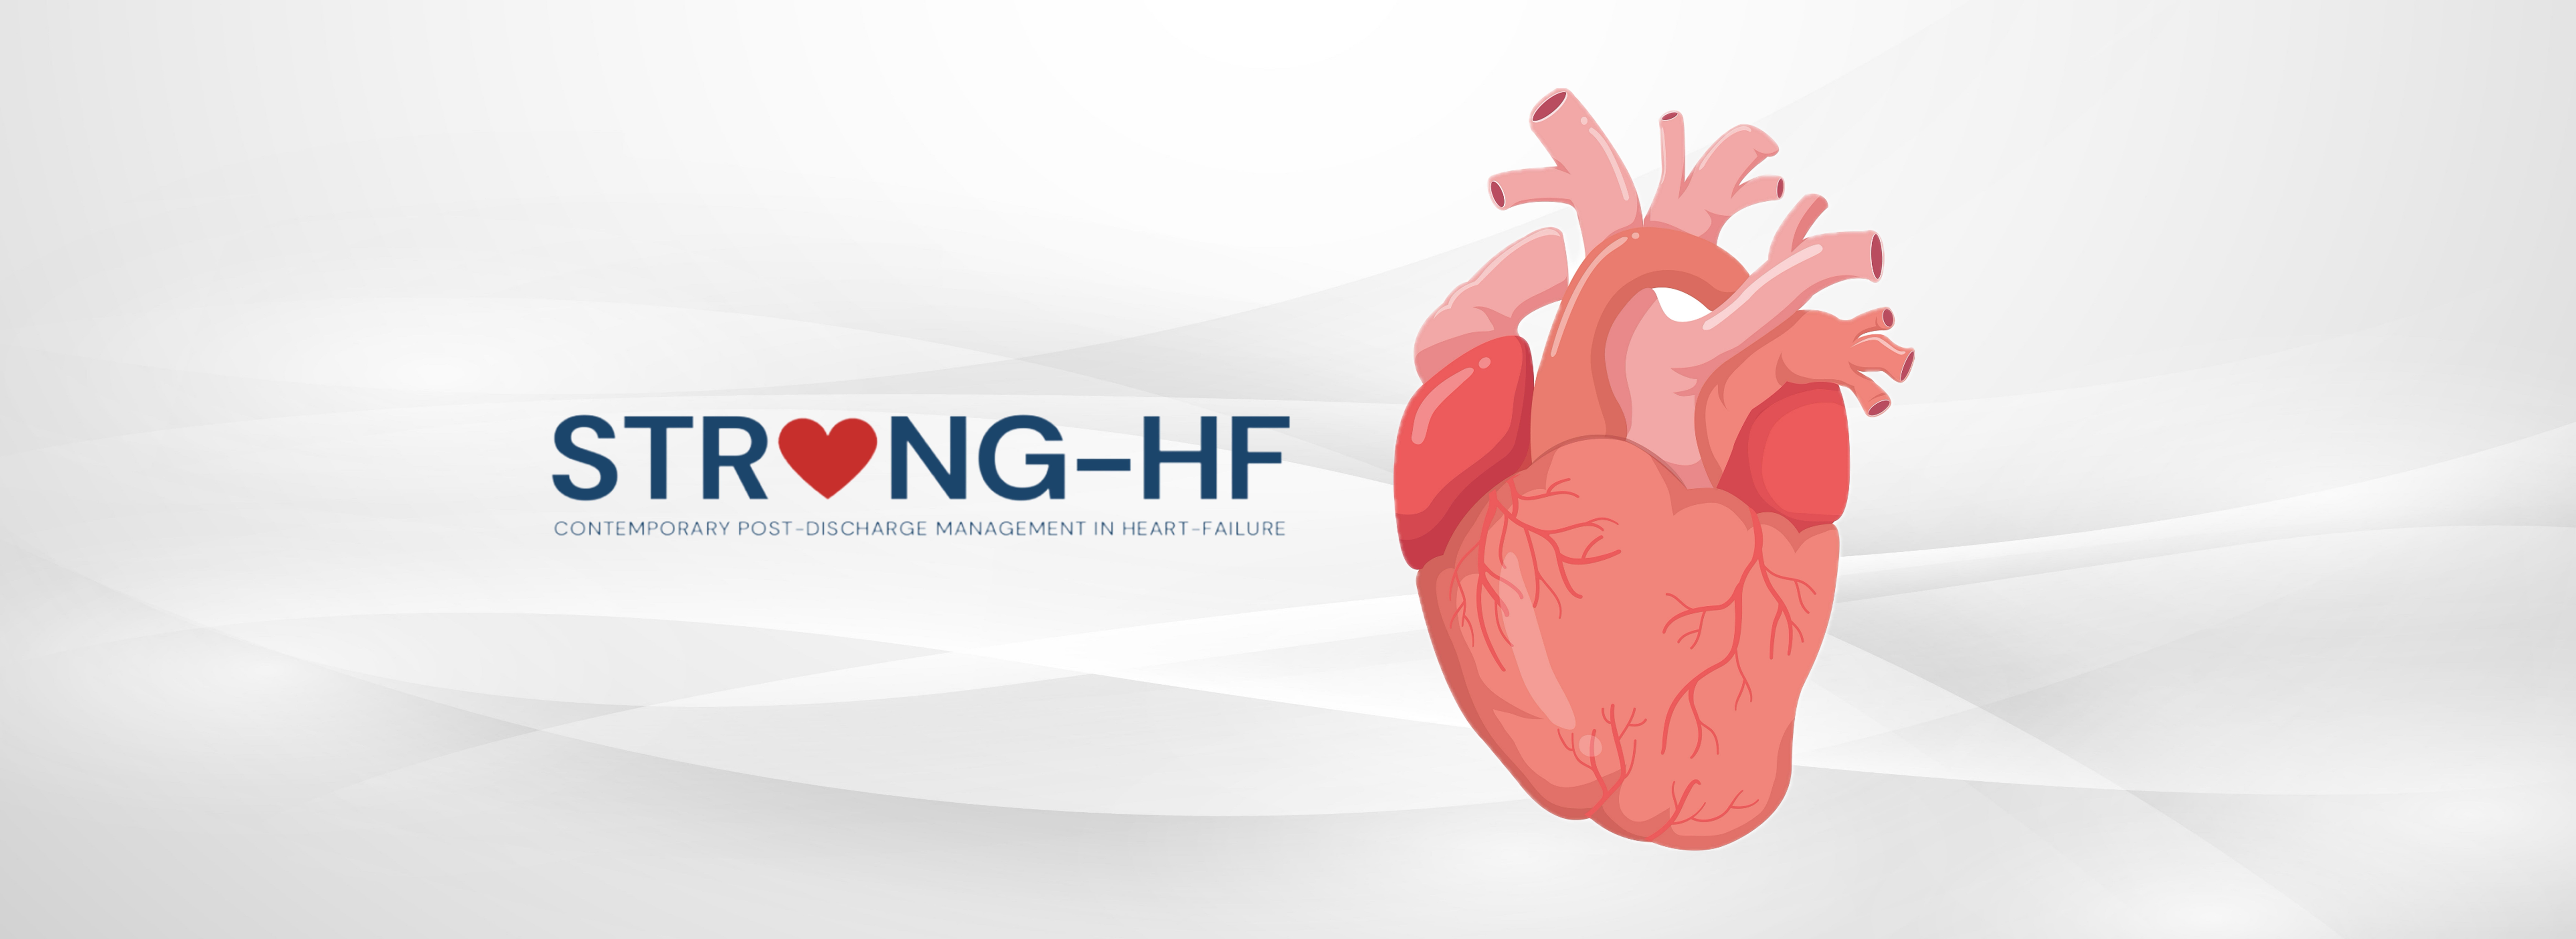 Human heart illustration. Text on the left reads: Strong-HF, Contemporary post-discharge management in heart-failure.